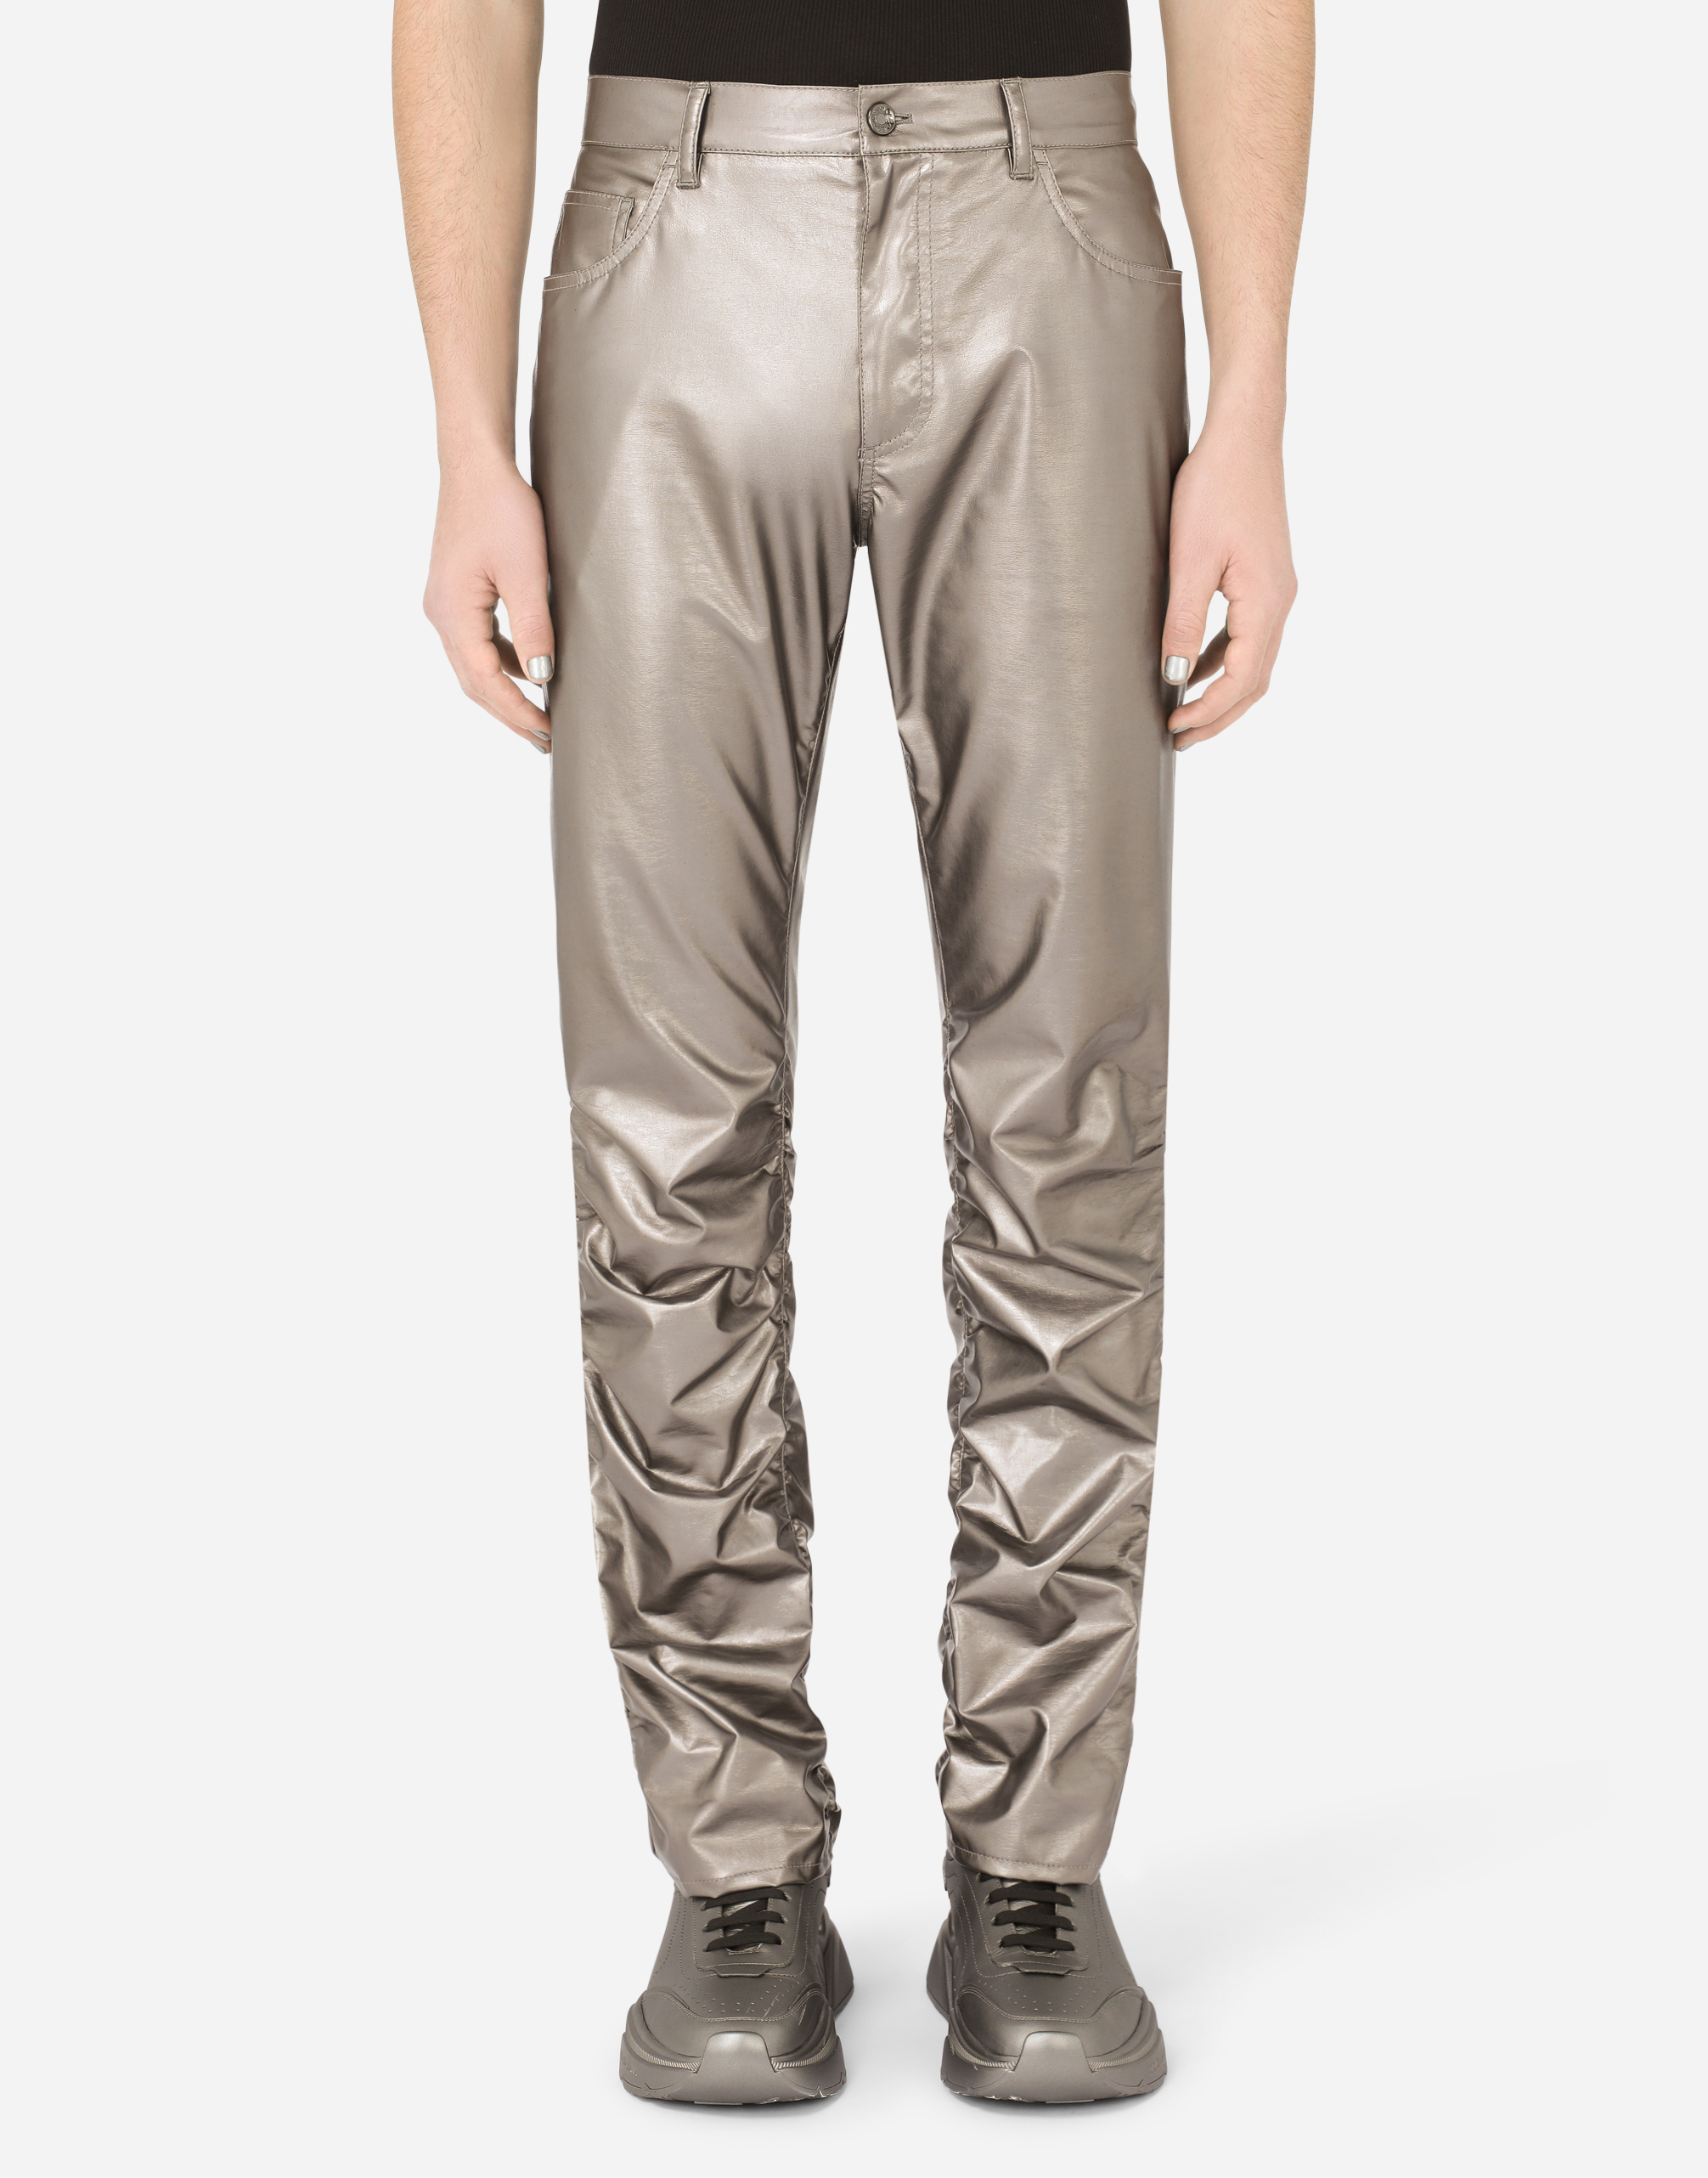 Laminated stretch technical fabric pants in Grey